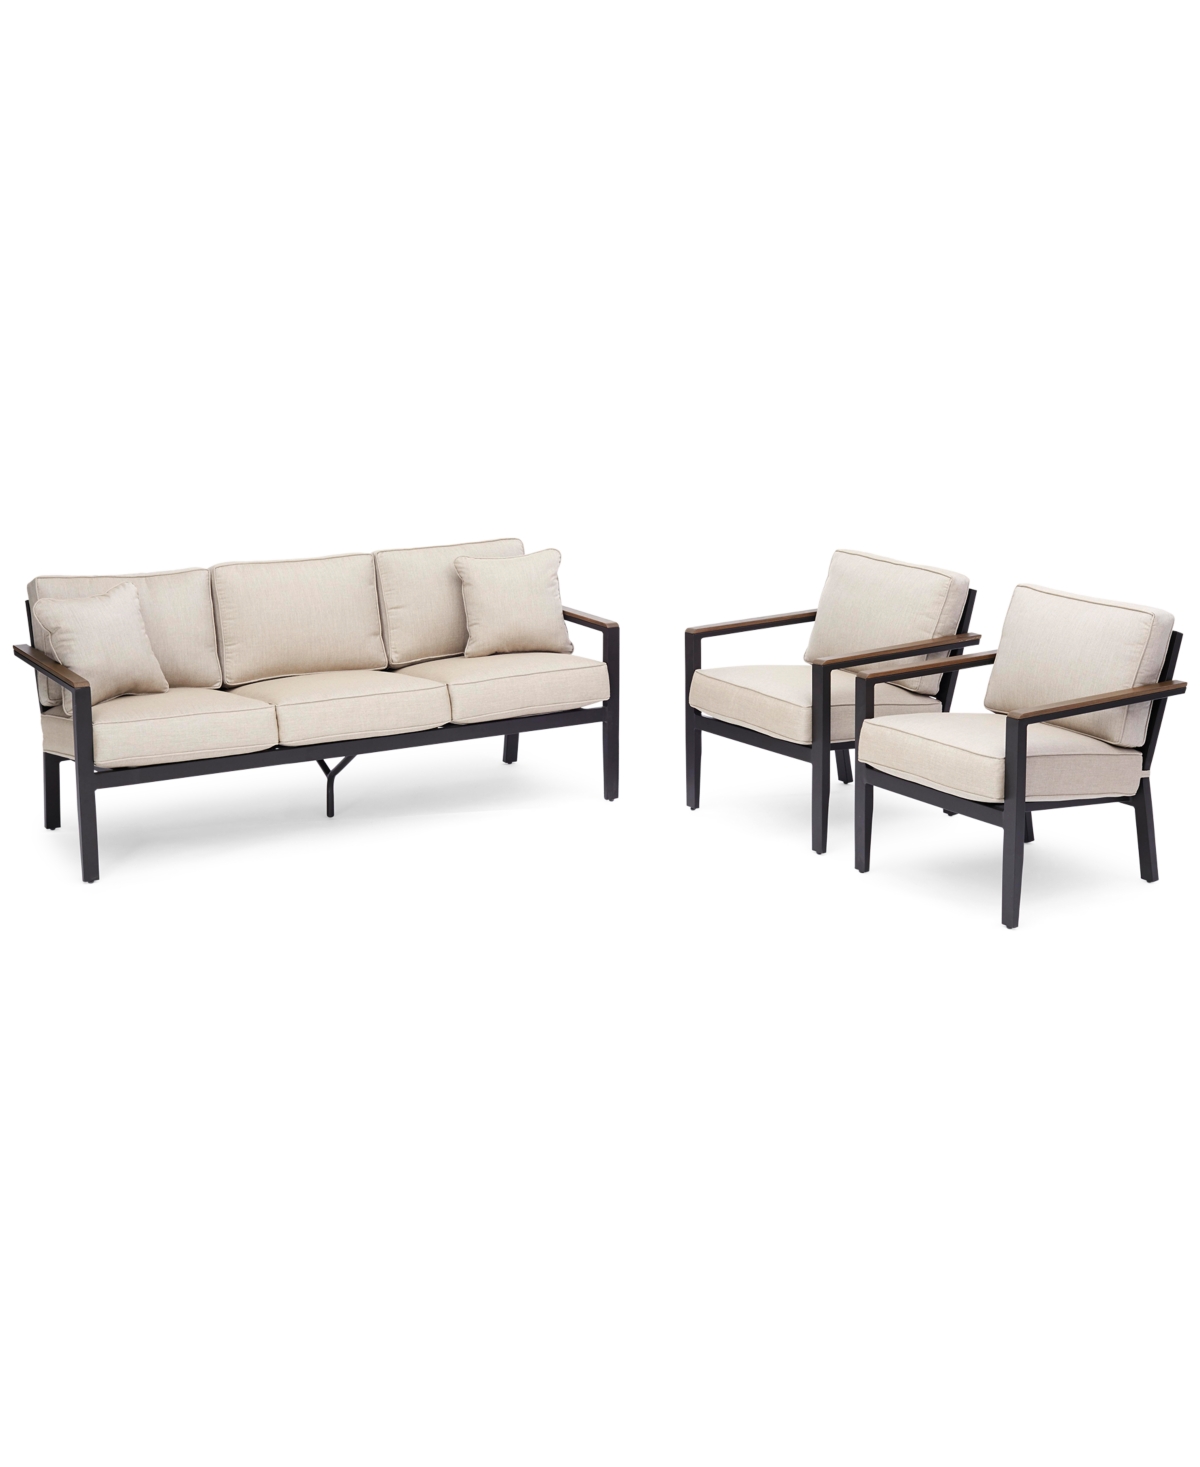 Stockholm Outdoor 3-Pc. Seating Set (Sofa & 2 Club Chairs) with Outdoor Cushions, Created for Macys